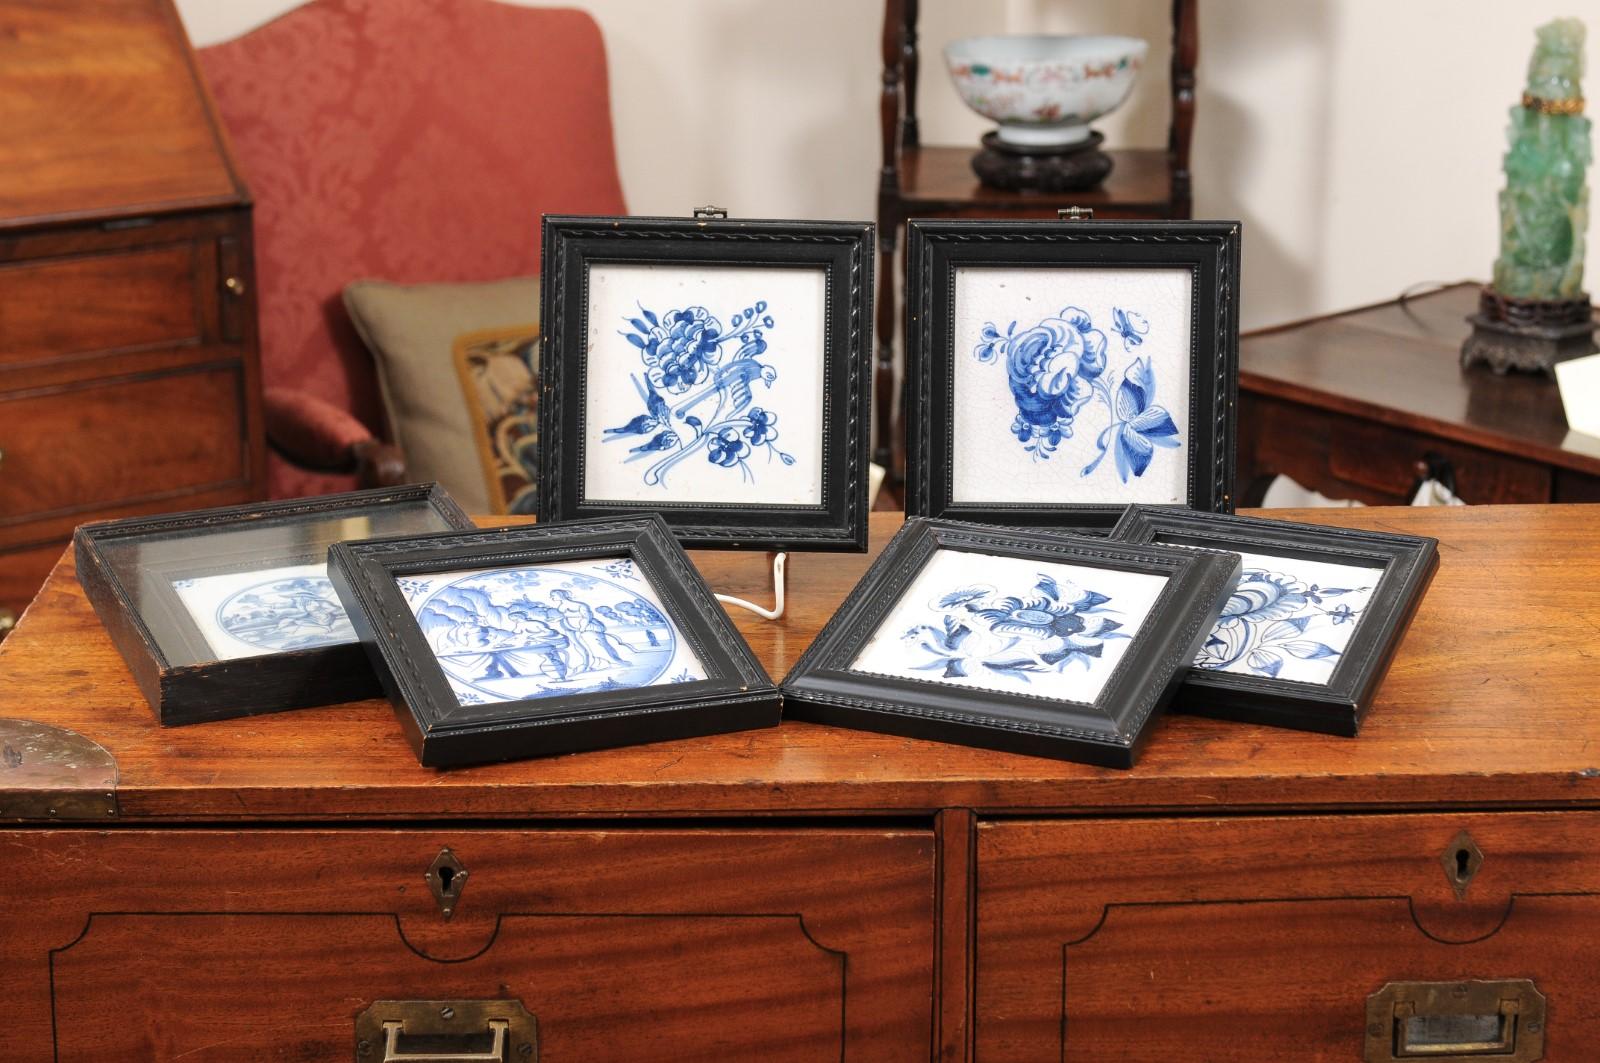  Set of 6 Assorted 18th Century Blue & White Delft Tiles in Black Frames In Good Condition For Sale In Atlanta, GA